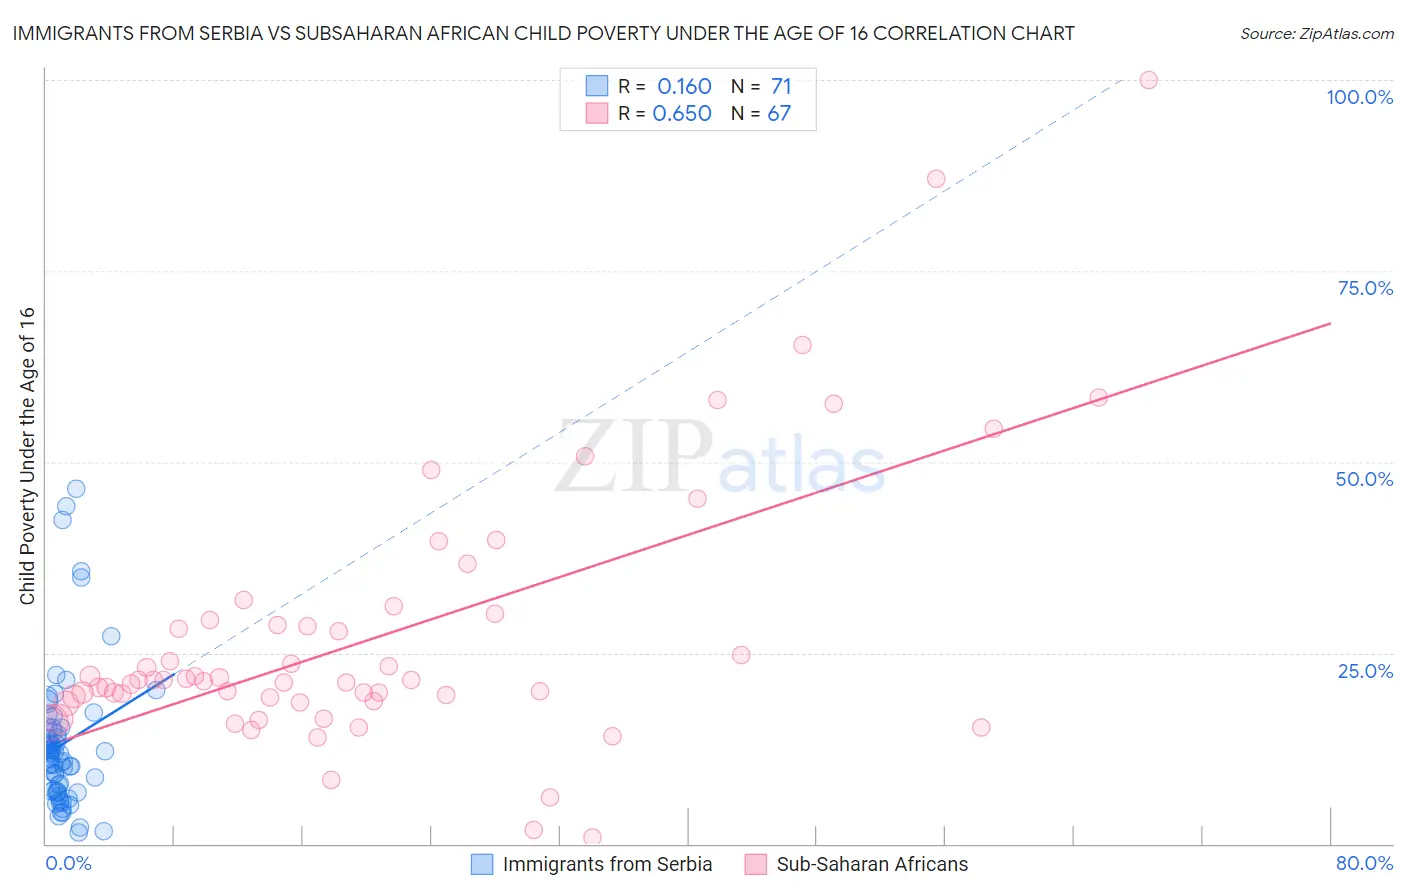 Immigrants from Serbia vs Subsaharan African Child Poverty Under the Age of 16